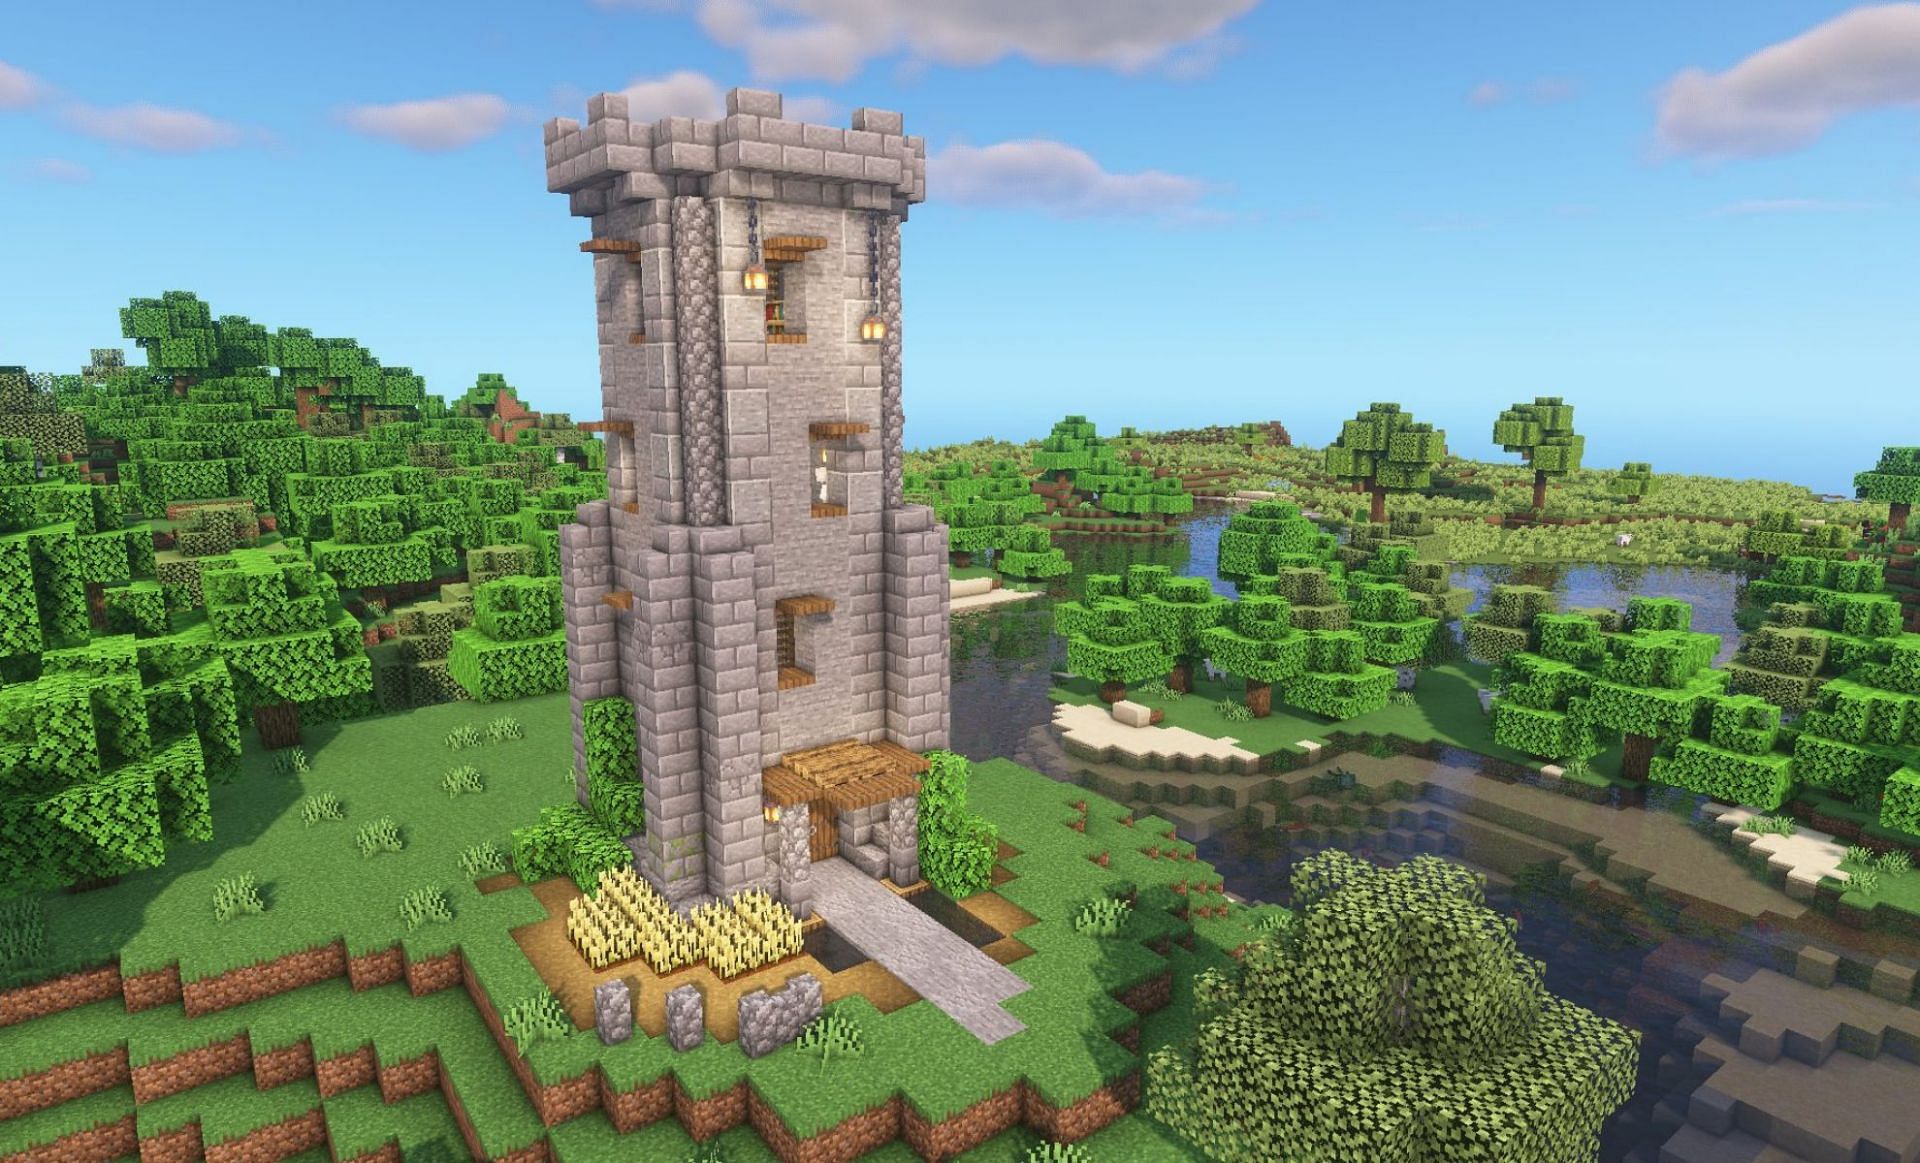 A tower in the game (Image via fedo_minecraft/Twitter)